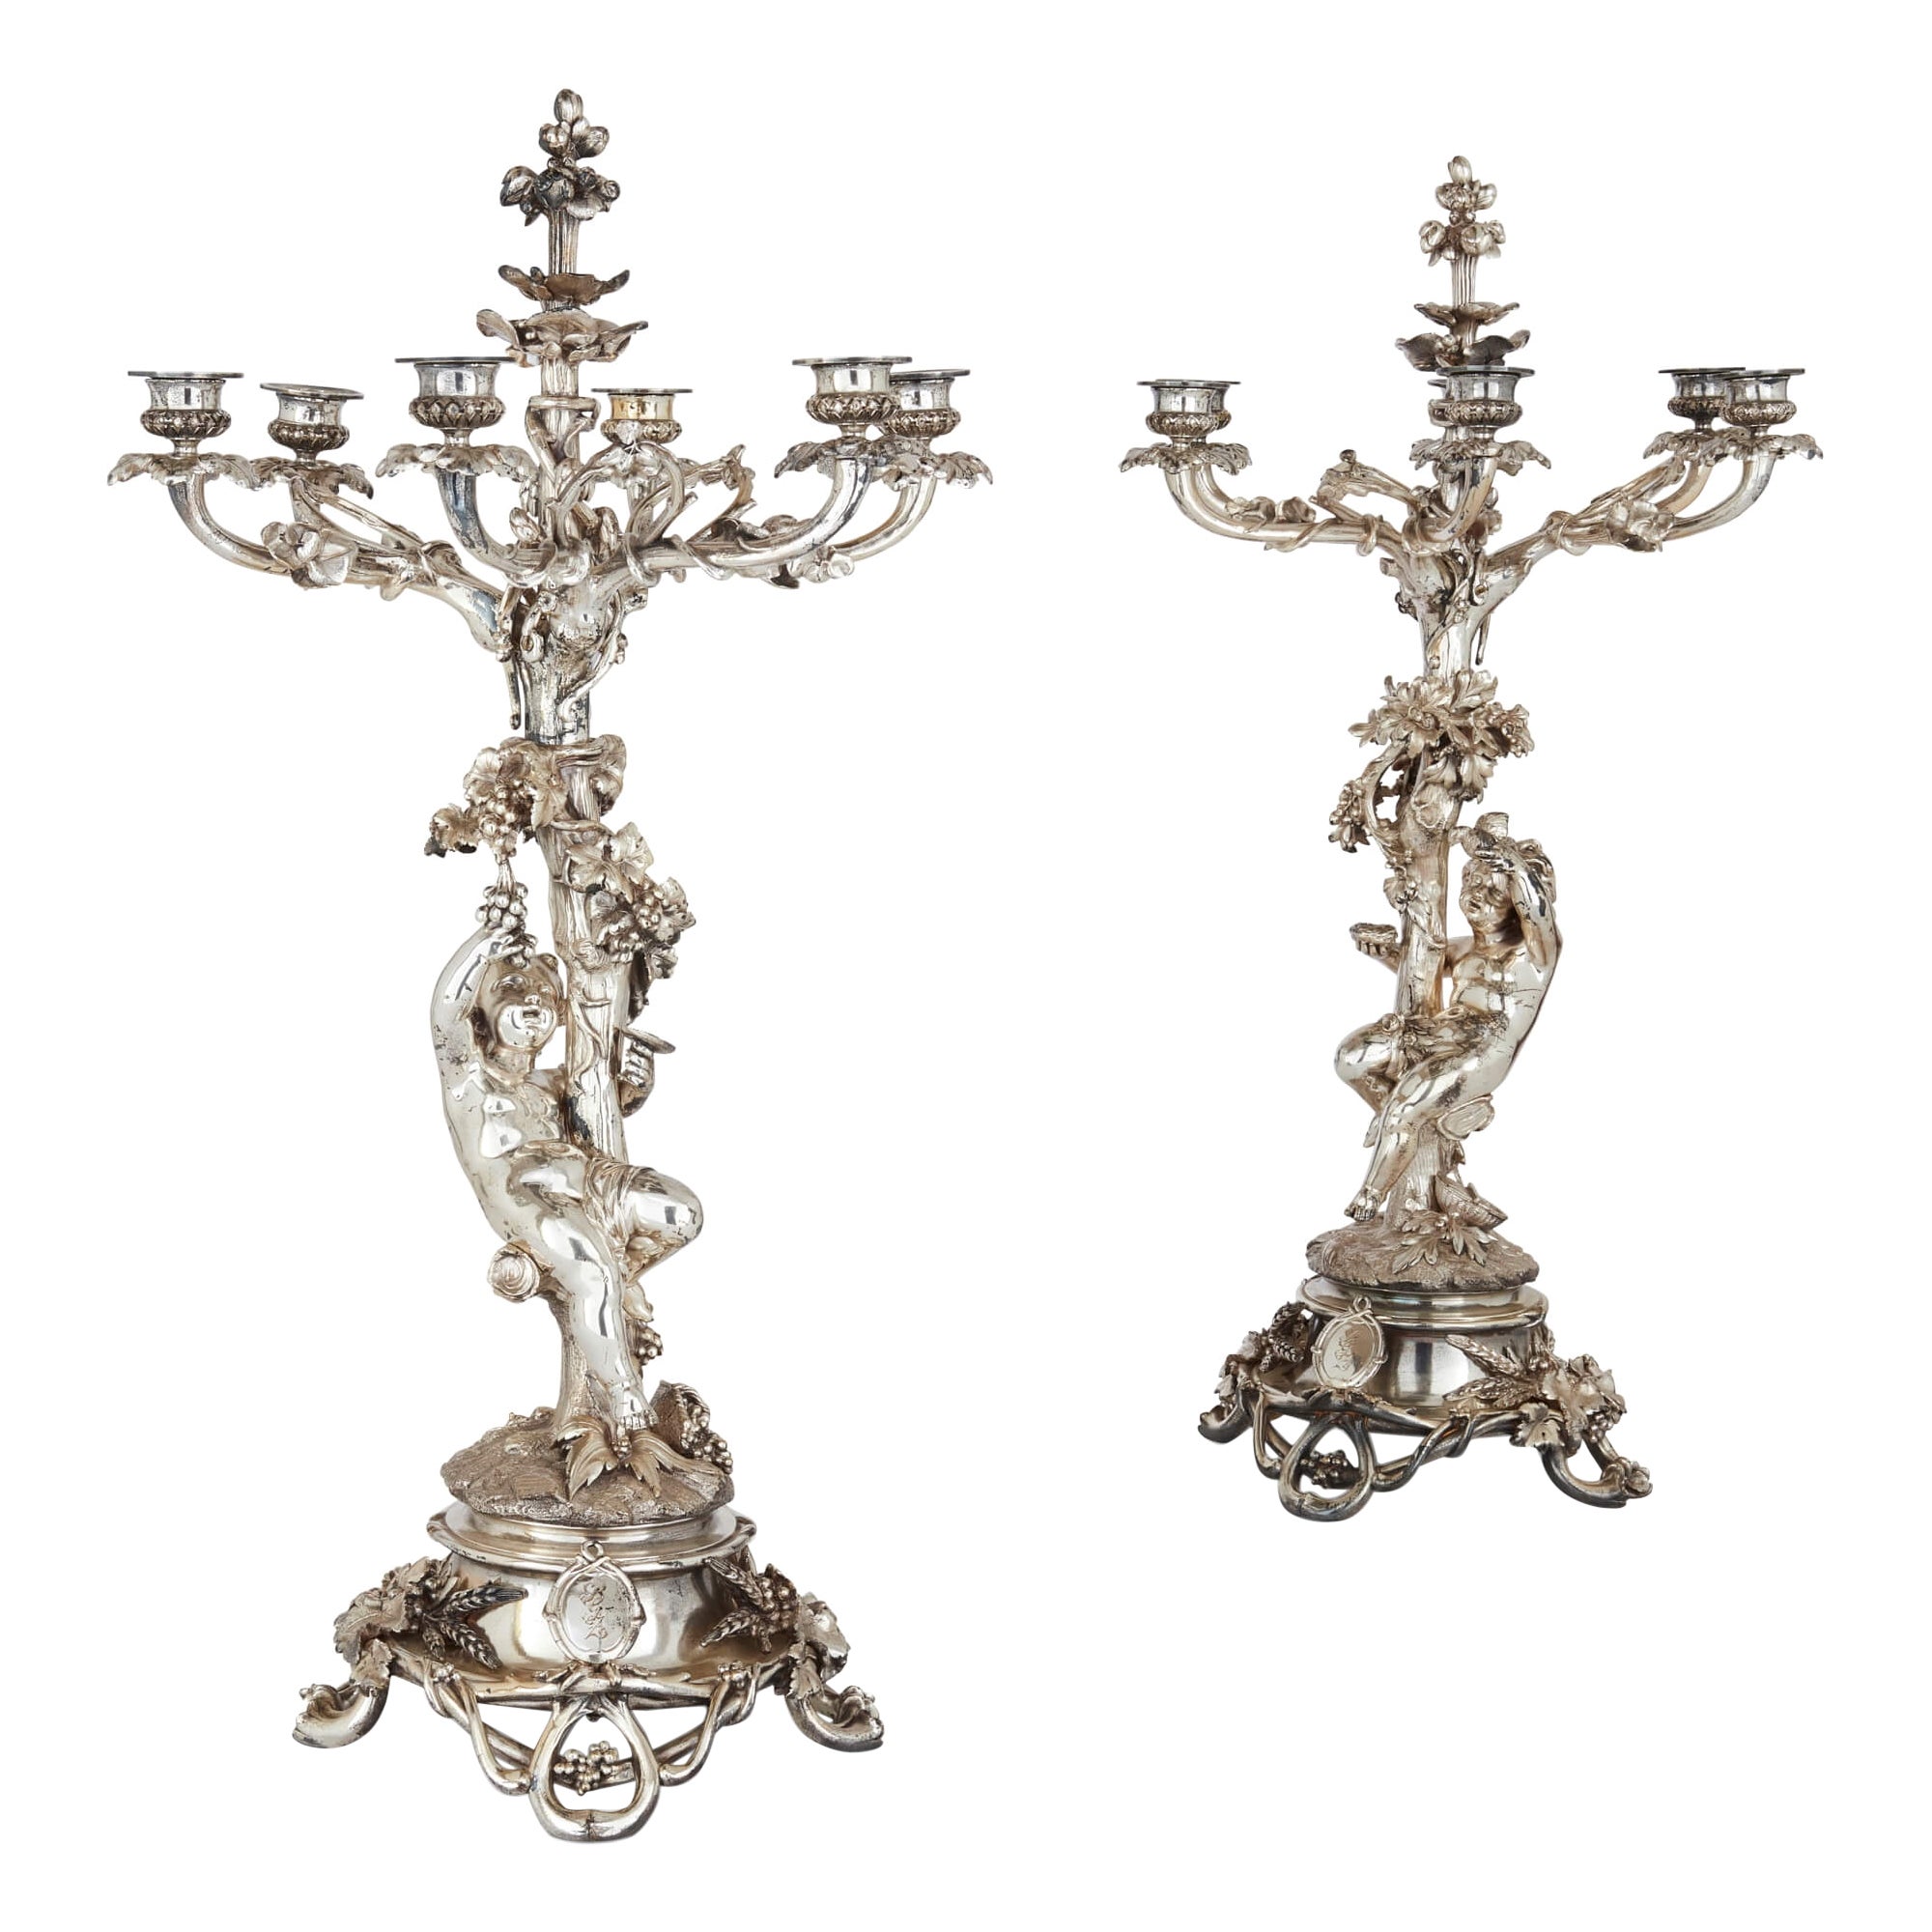 Pair of Antique Six-Light Silvered Bronze Candelabra by Christofle